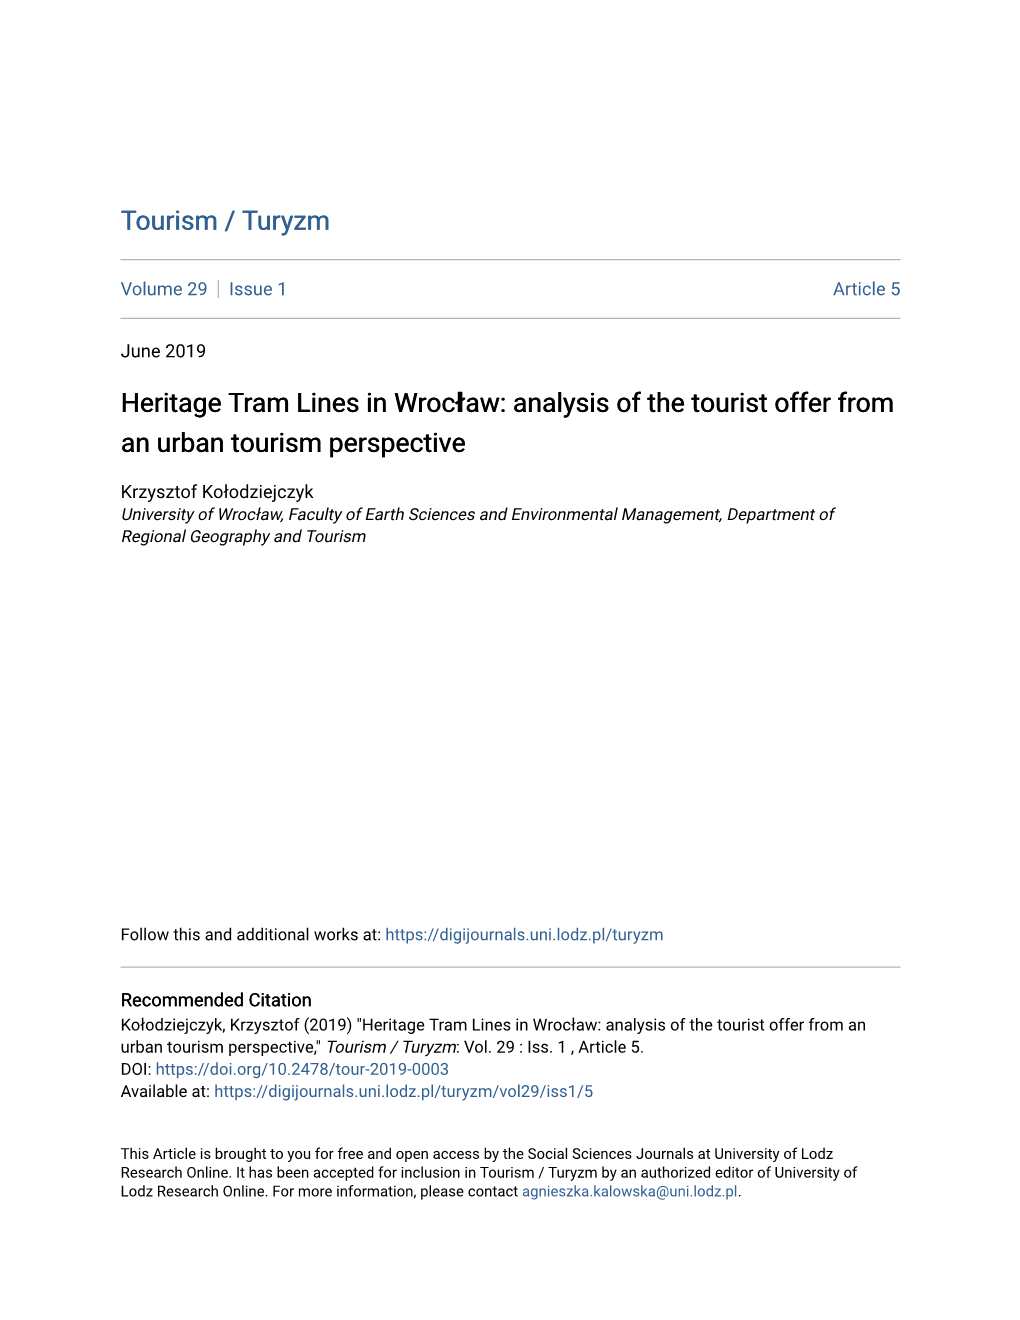 Heritage Tram Lines in Wrocław: Analysis of the Tourist Offer from an Urban Tourism Perspective